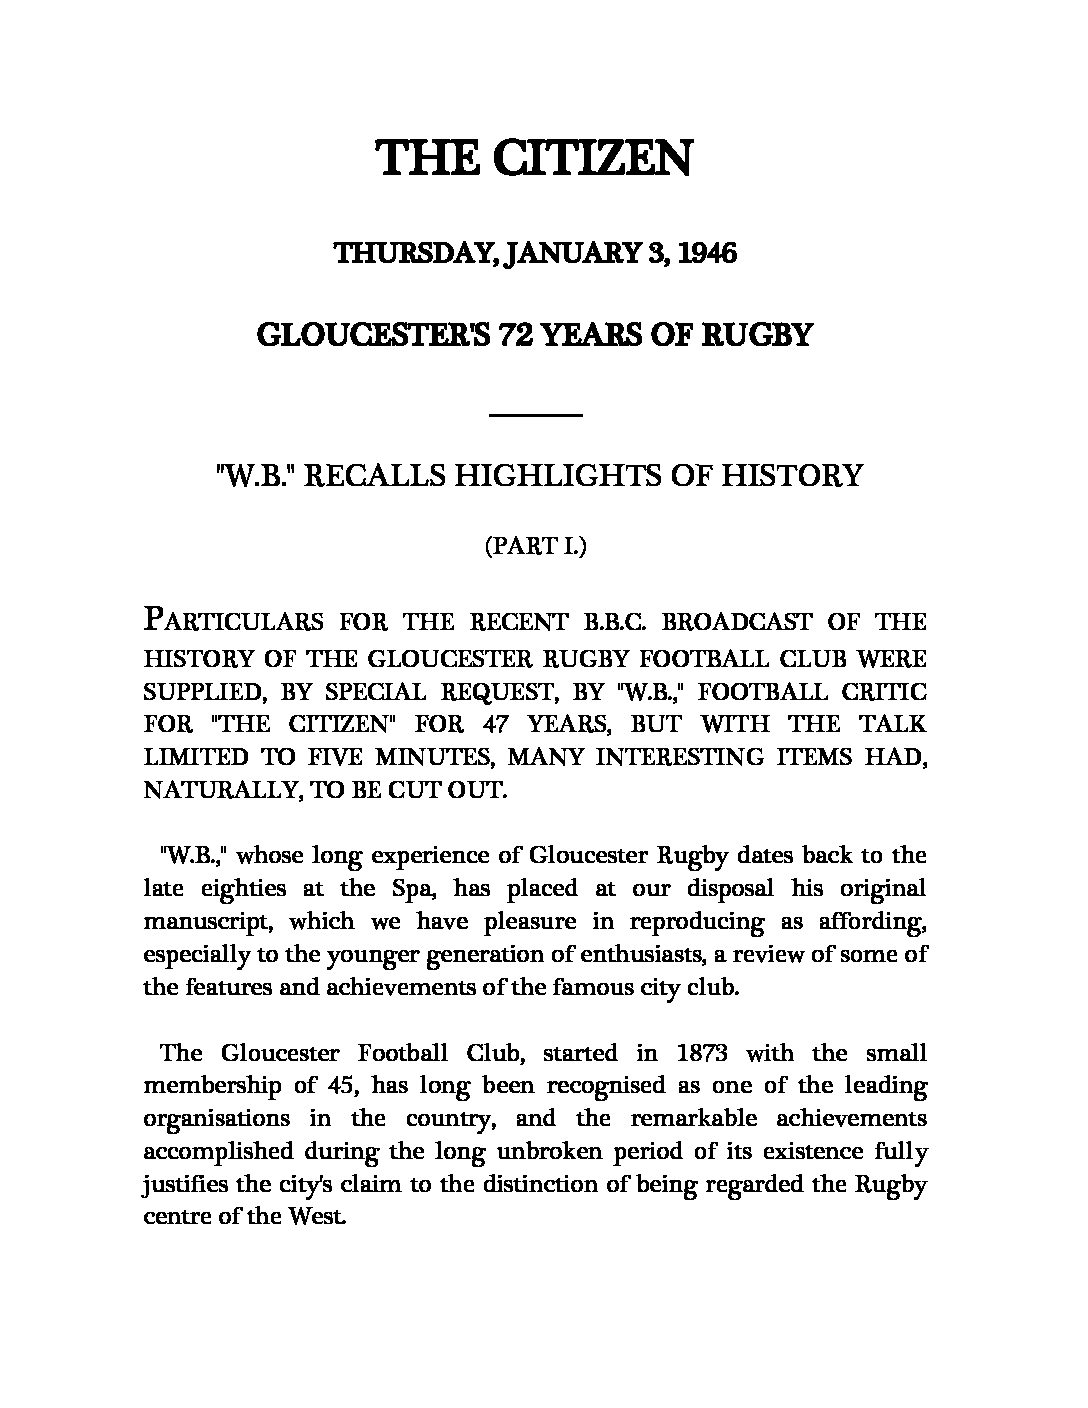 Gloucester's 72 Years of Rugby